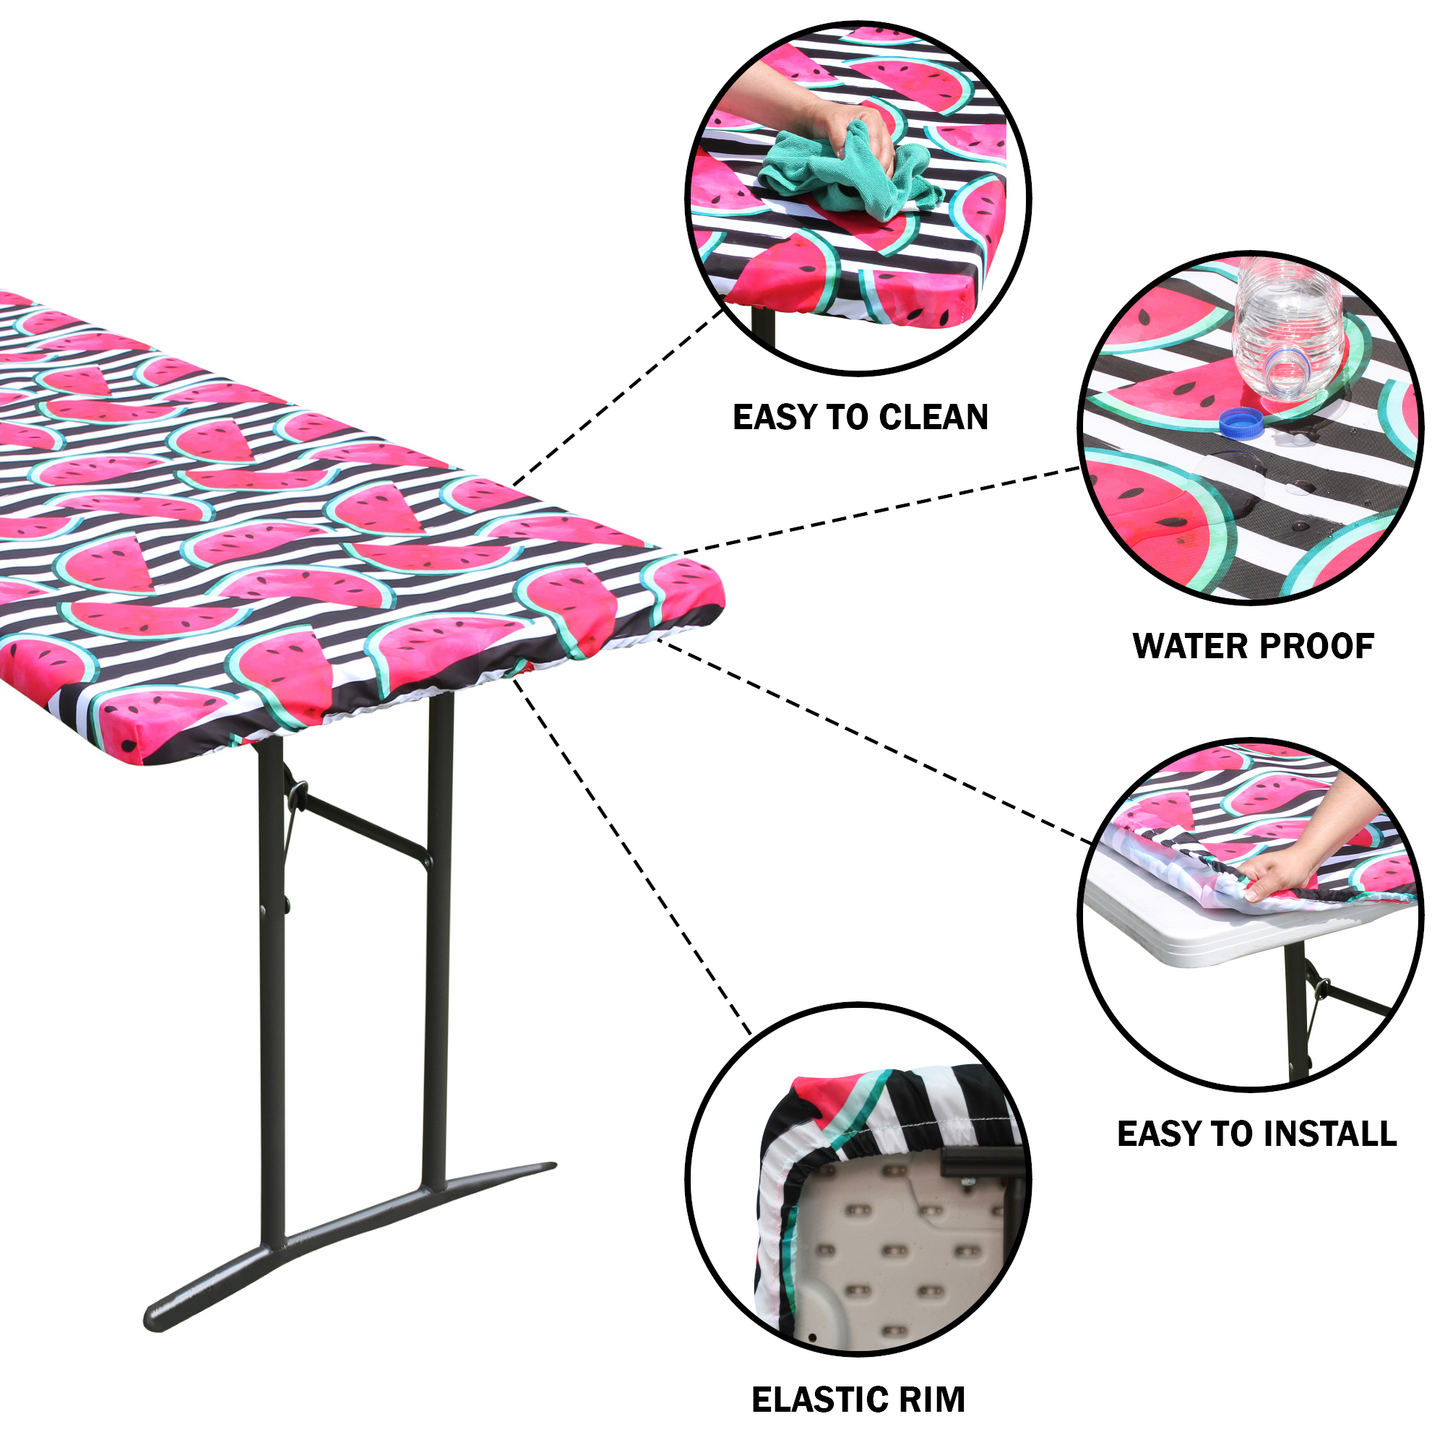 Image of TableCloth PLUS 72" Watermelon Fitted PEVA Vinyl Tablecloth for 6' Folding Tables are easy to clean, water proof, easy to install, and have an elastic rim to secure the tablecloth to a table